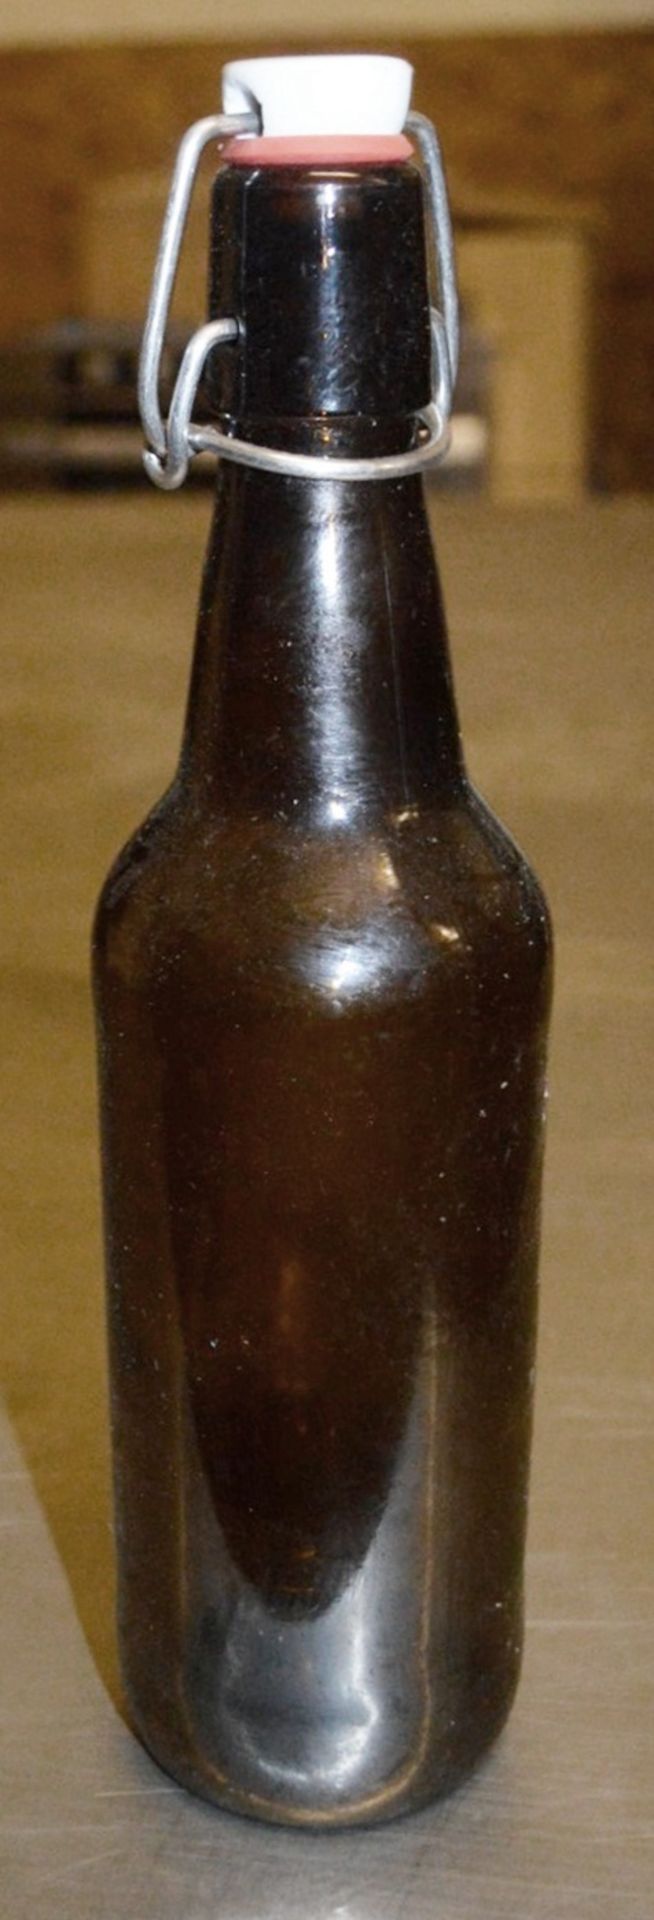 *Listing Updated* Job Lot Of 700 x Brown Beer Bottles - New / Unused Stock - Low Start, No Reserve - Image 4 of 5